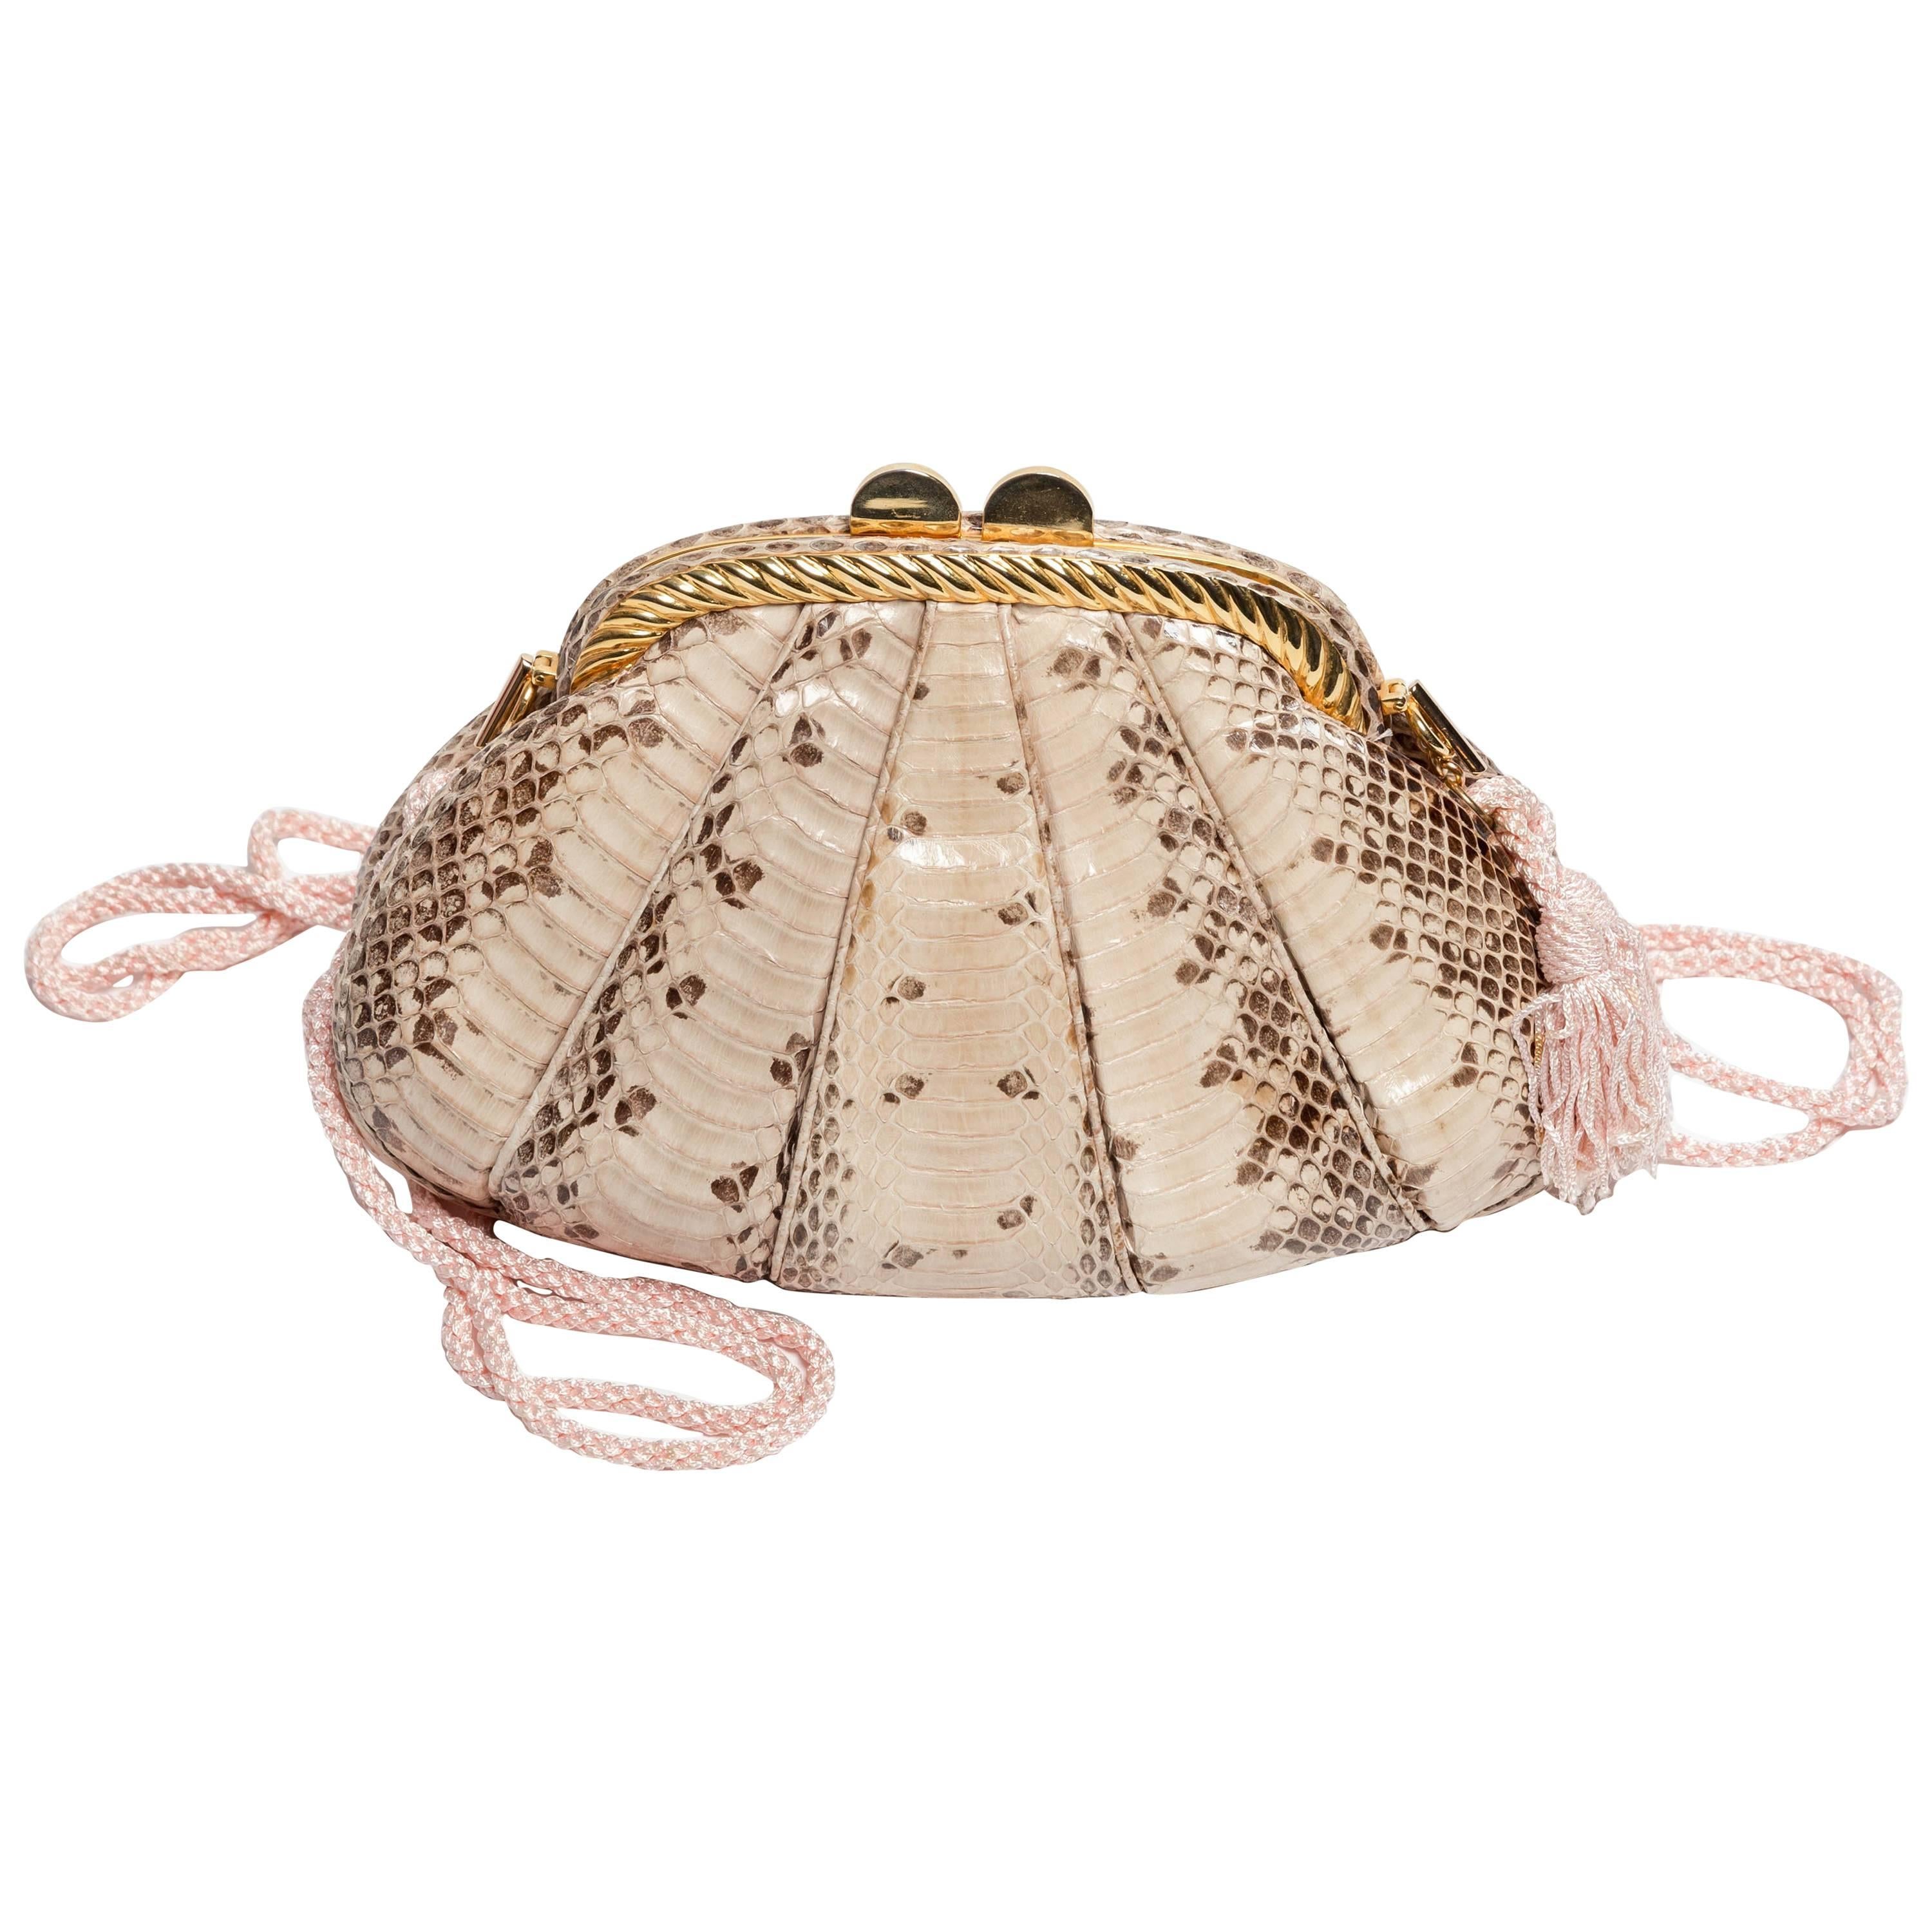 Judith Leiber Tan Python Clutch with Silk Rope Shoulder Strap For Sale